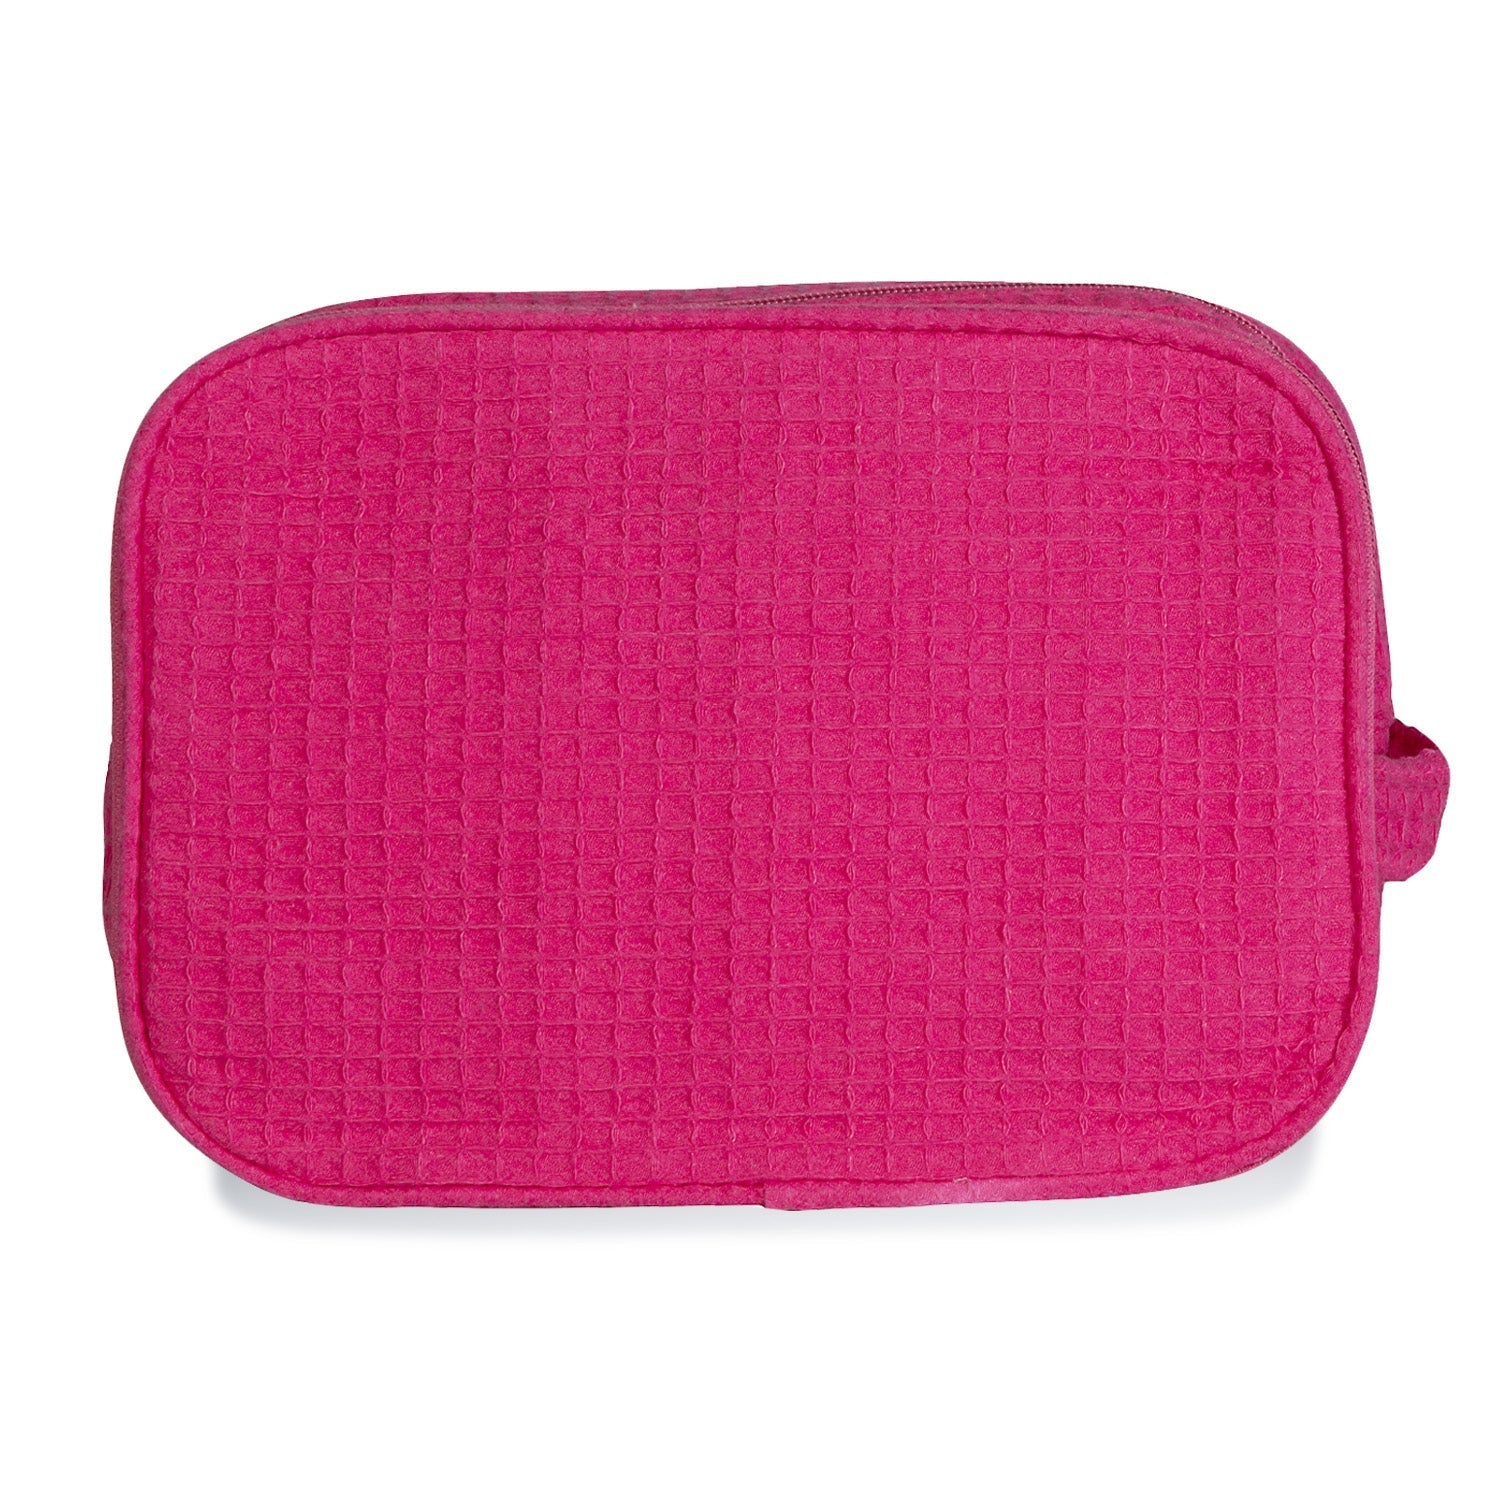 Waffle Weave Makeup Bag - Happy Thoughts Gifts